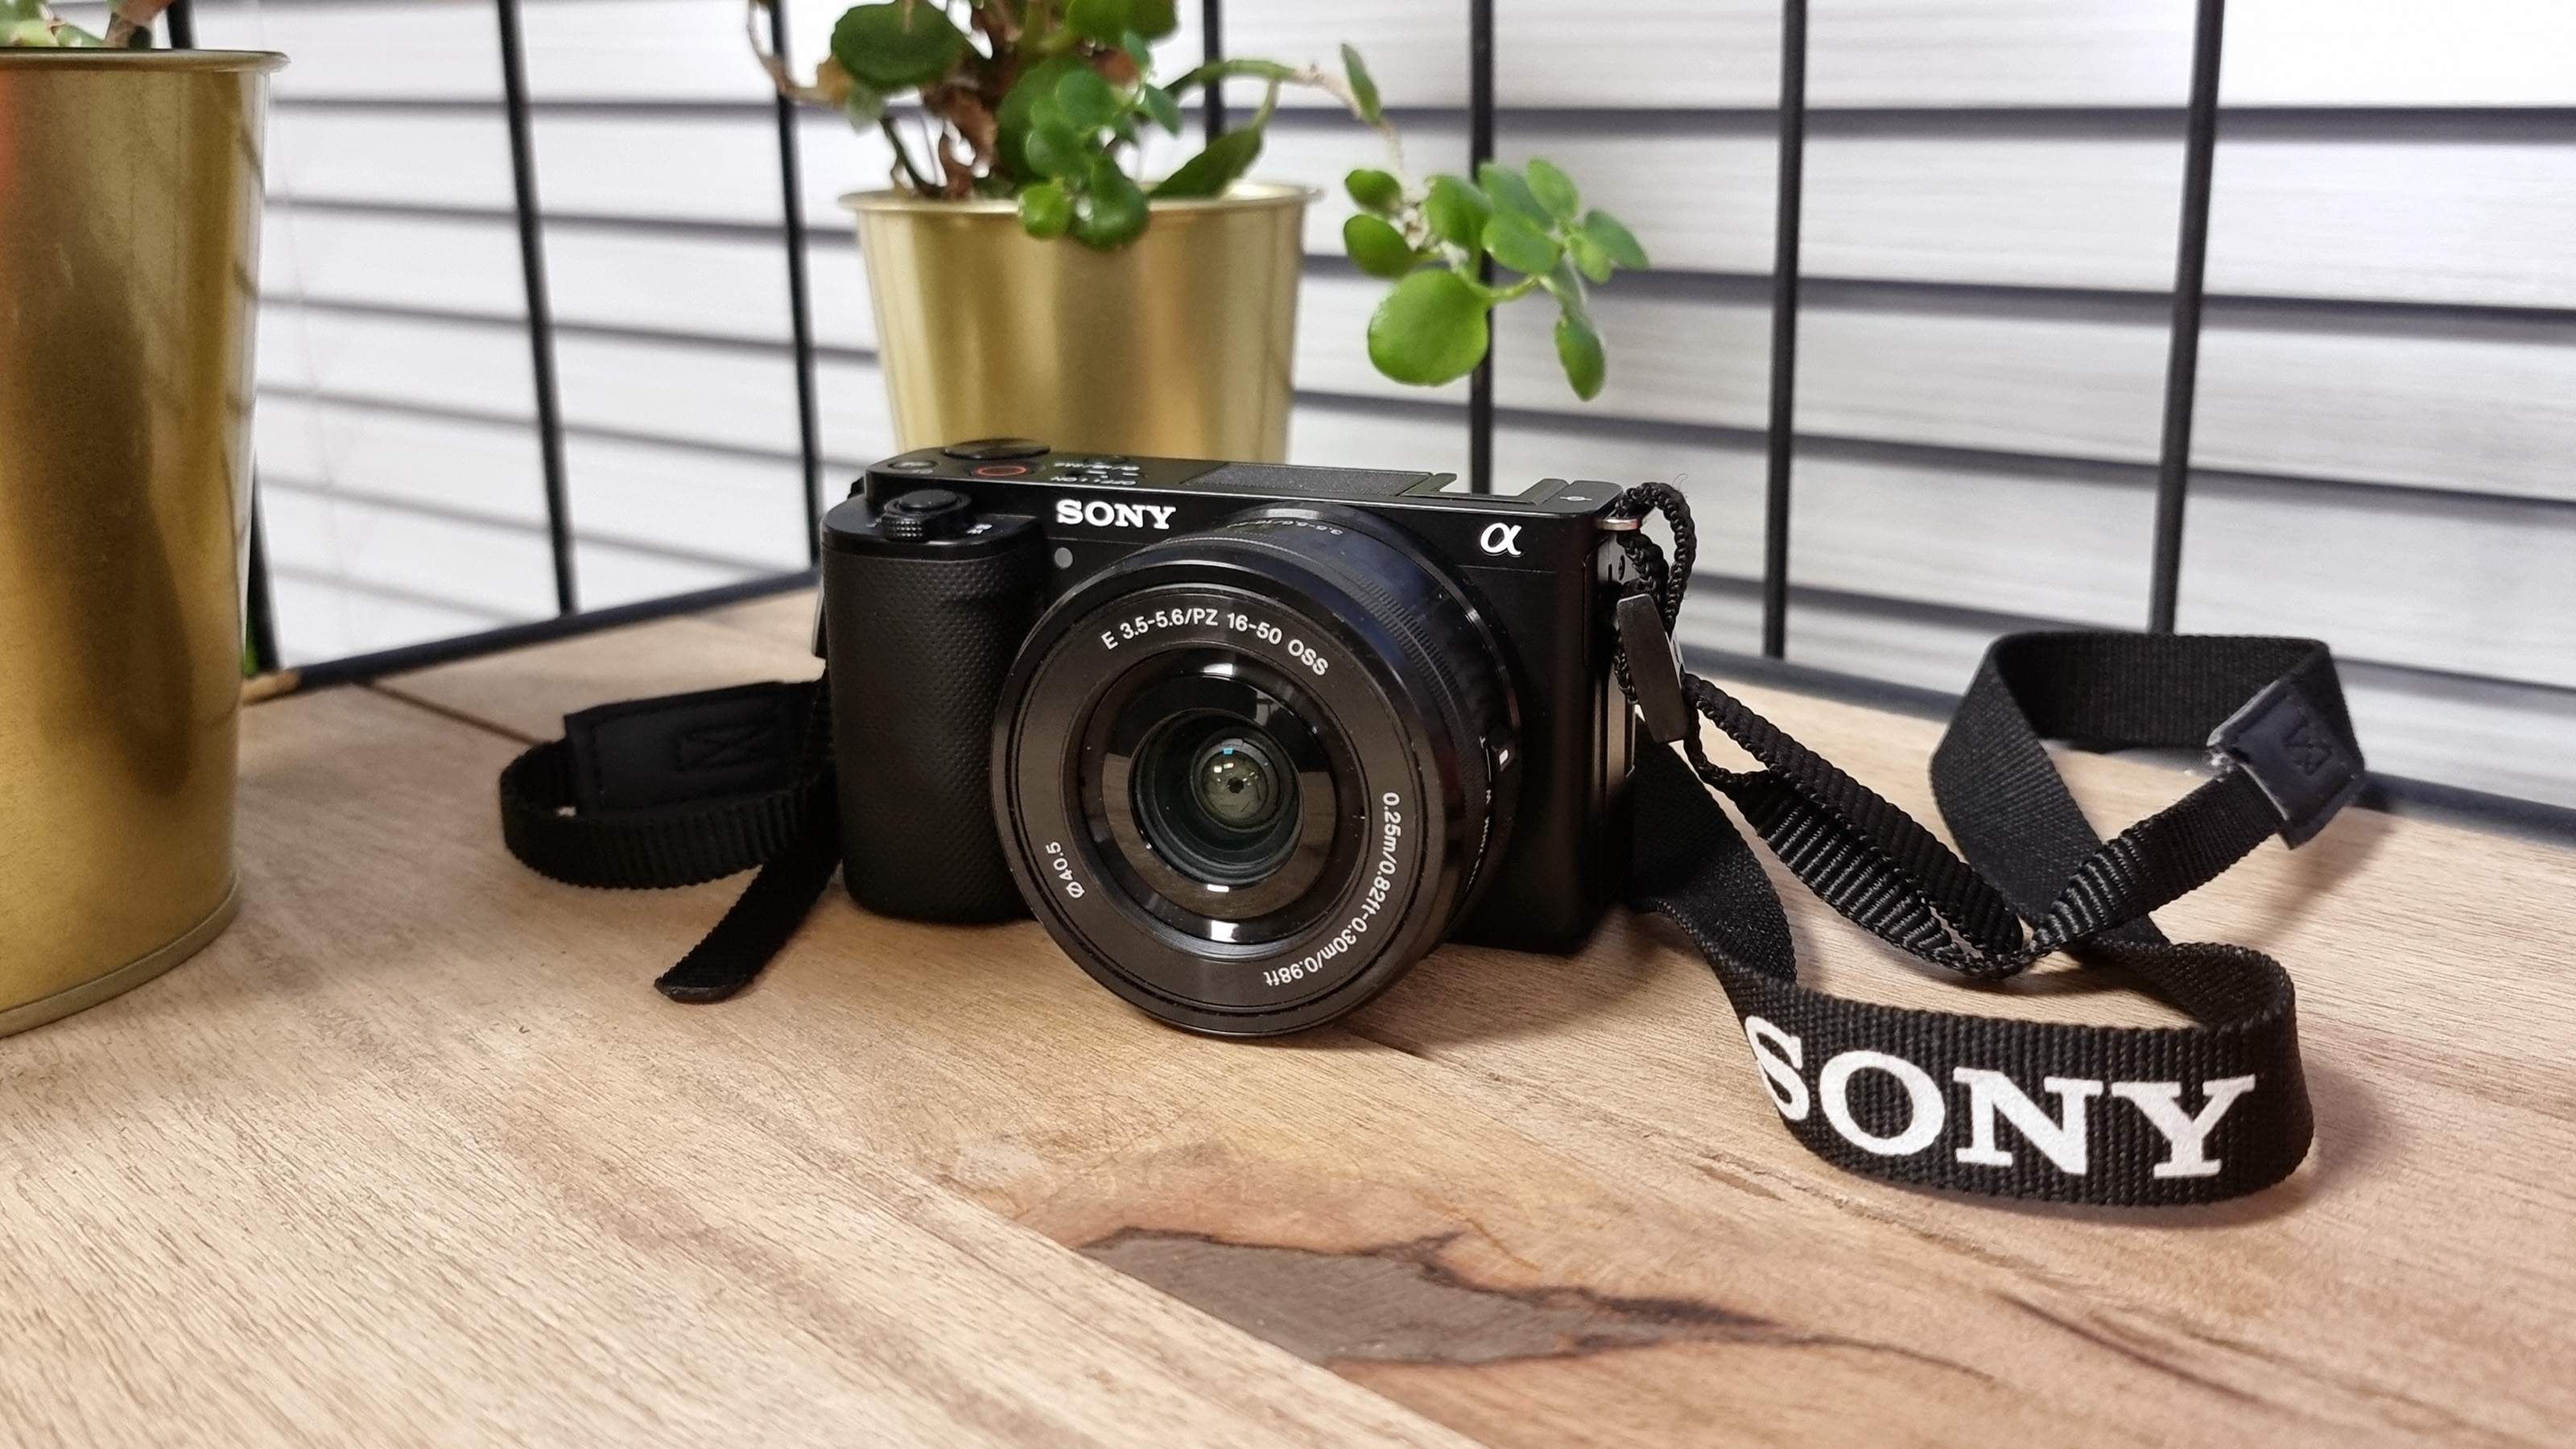 Buy Sony a6400 Mirrorless Camera in Black with 16-50mm Lens - Jessops